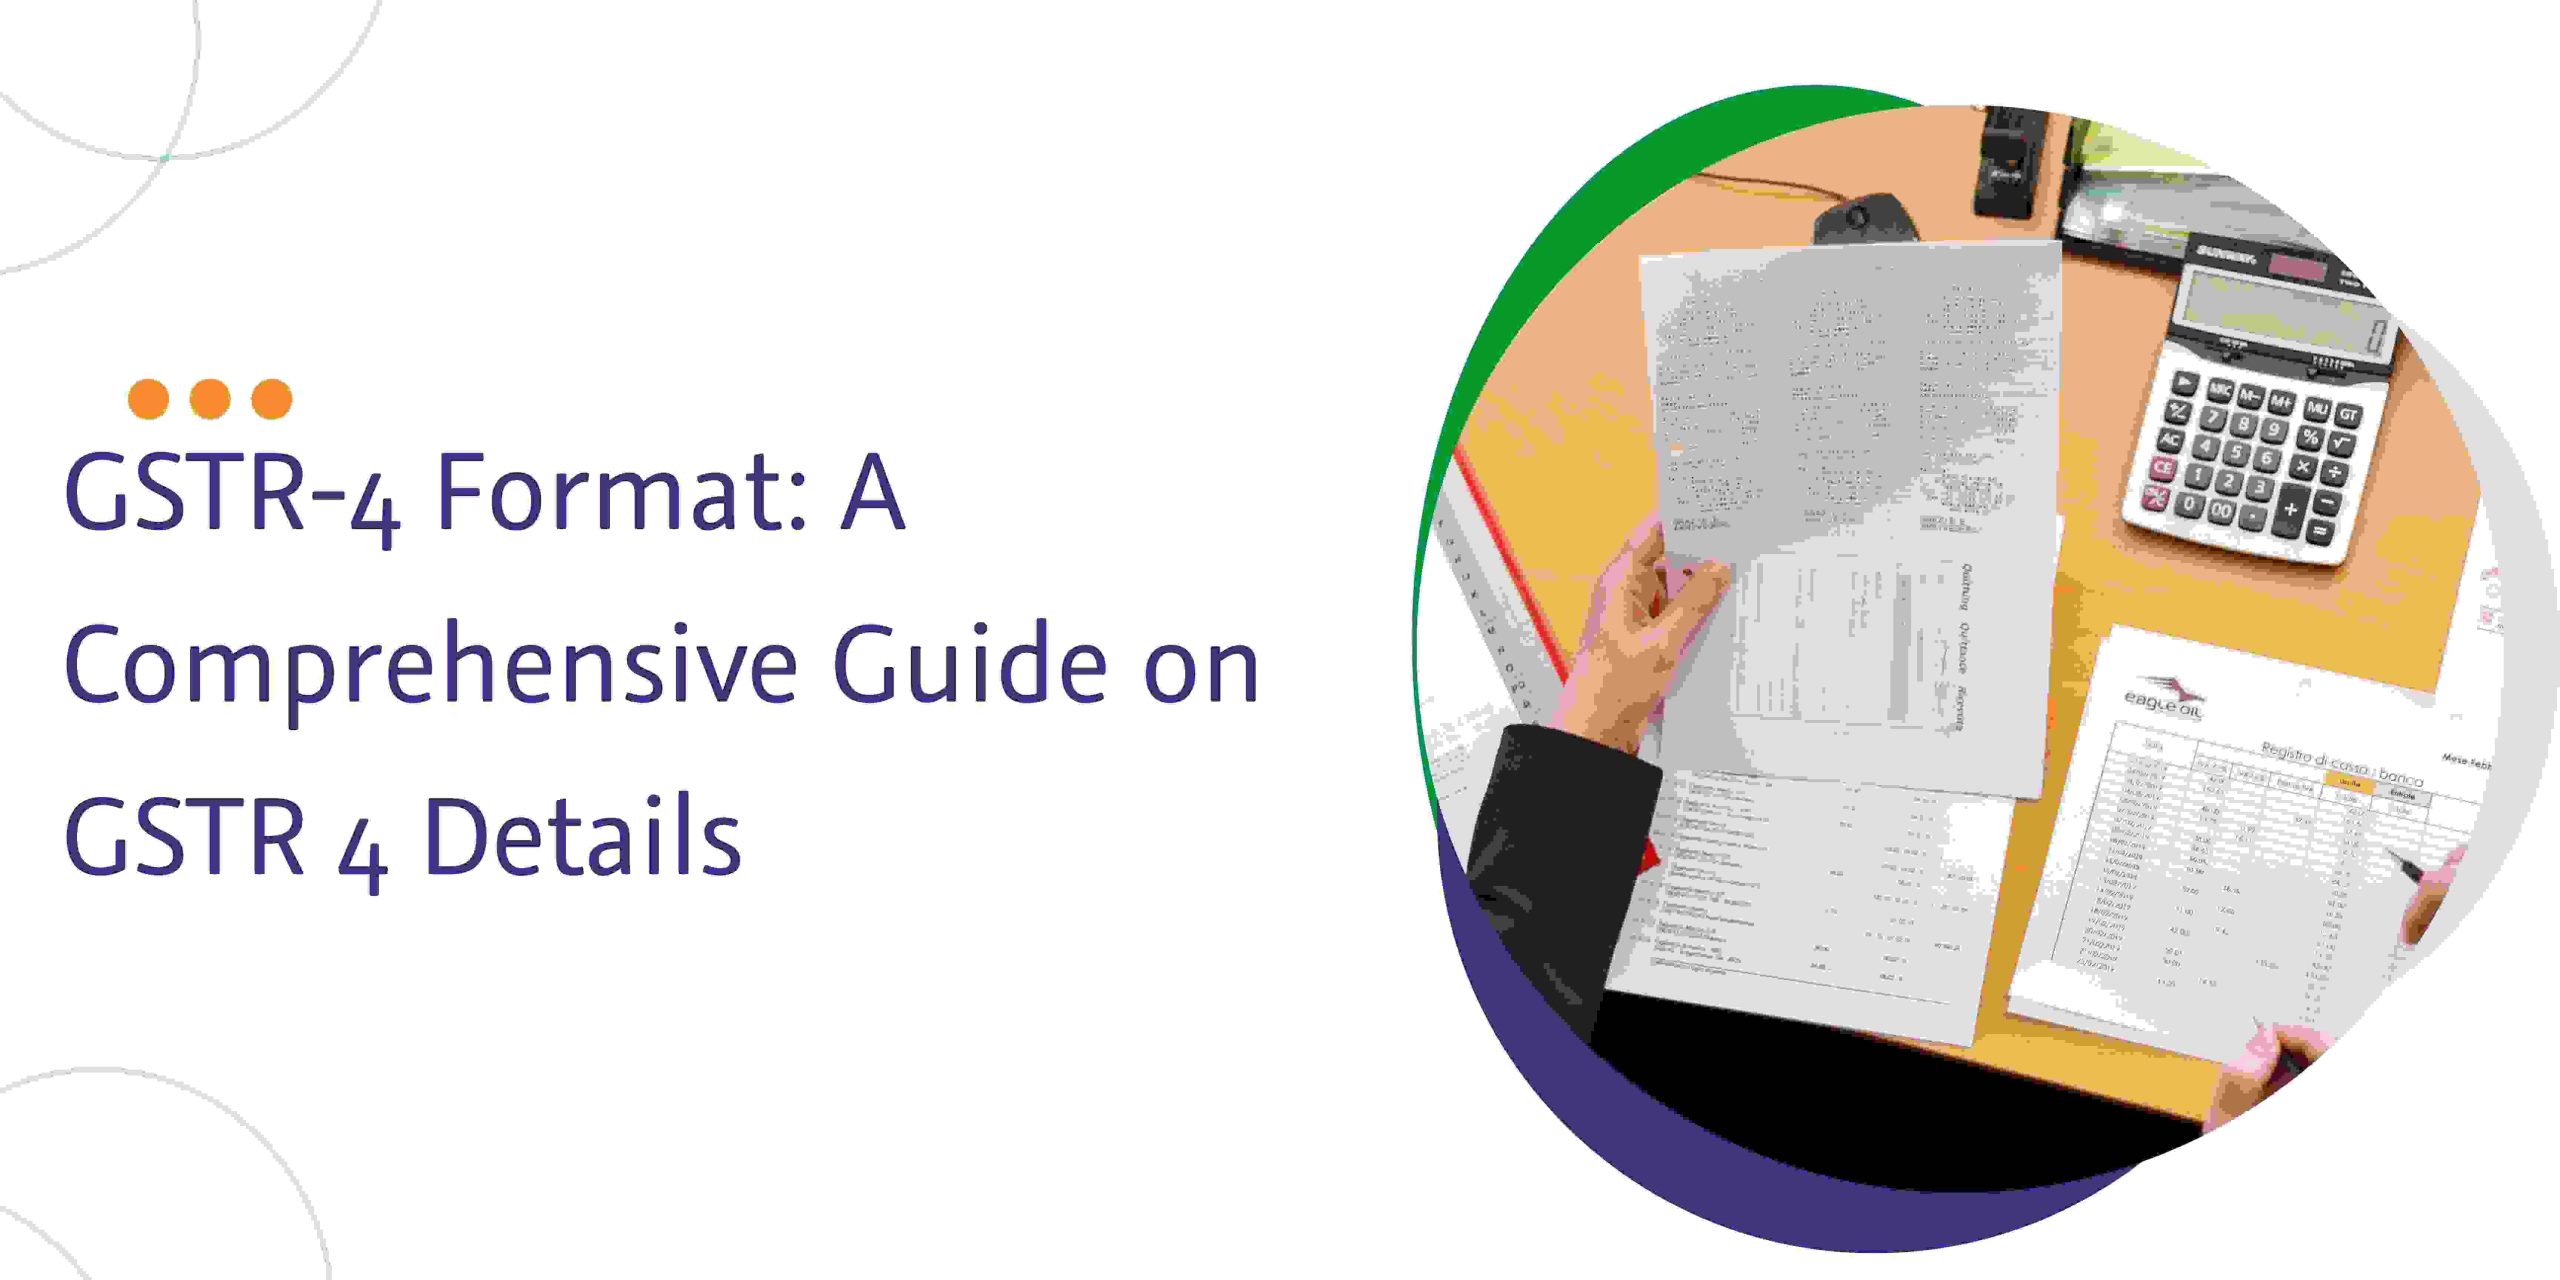 You are currently viewing GSTR-4 Format: A Comprehensive Guide on GSTR 4 Details